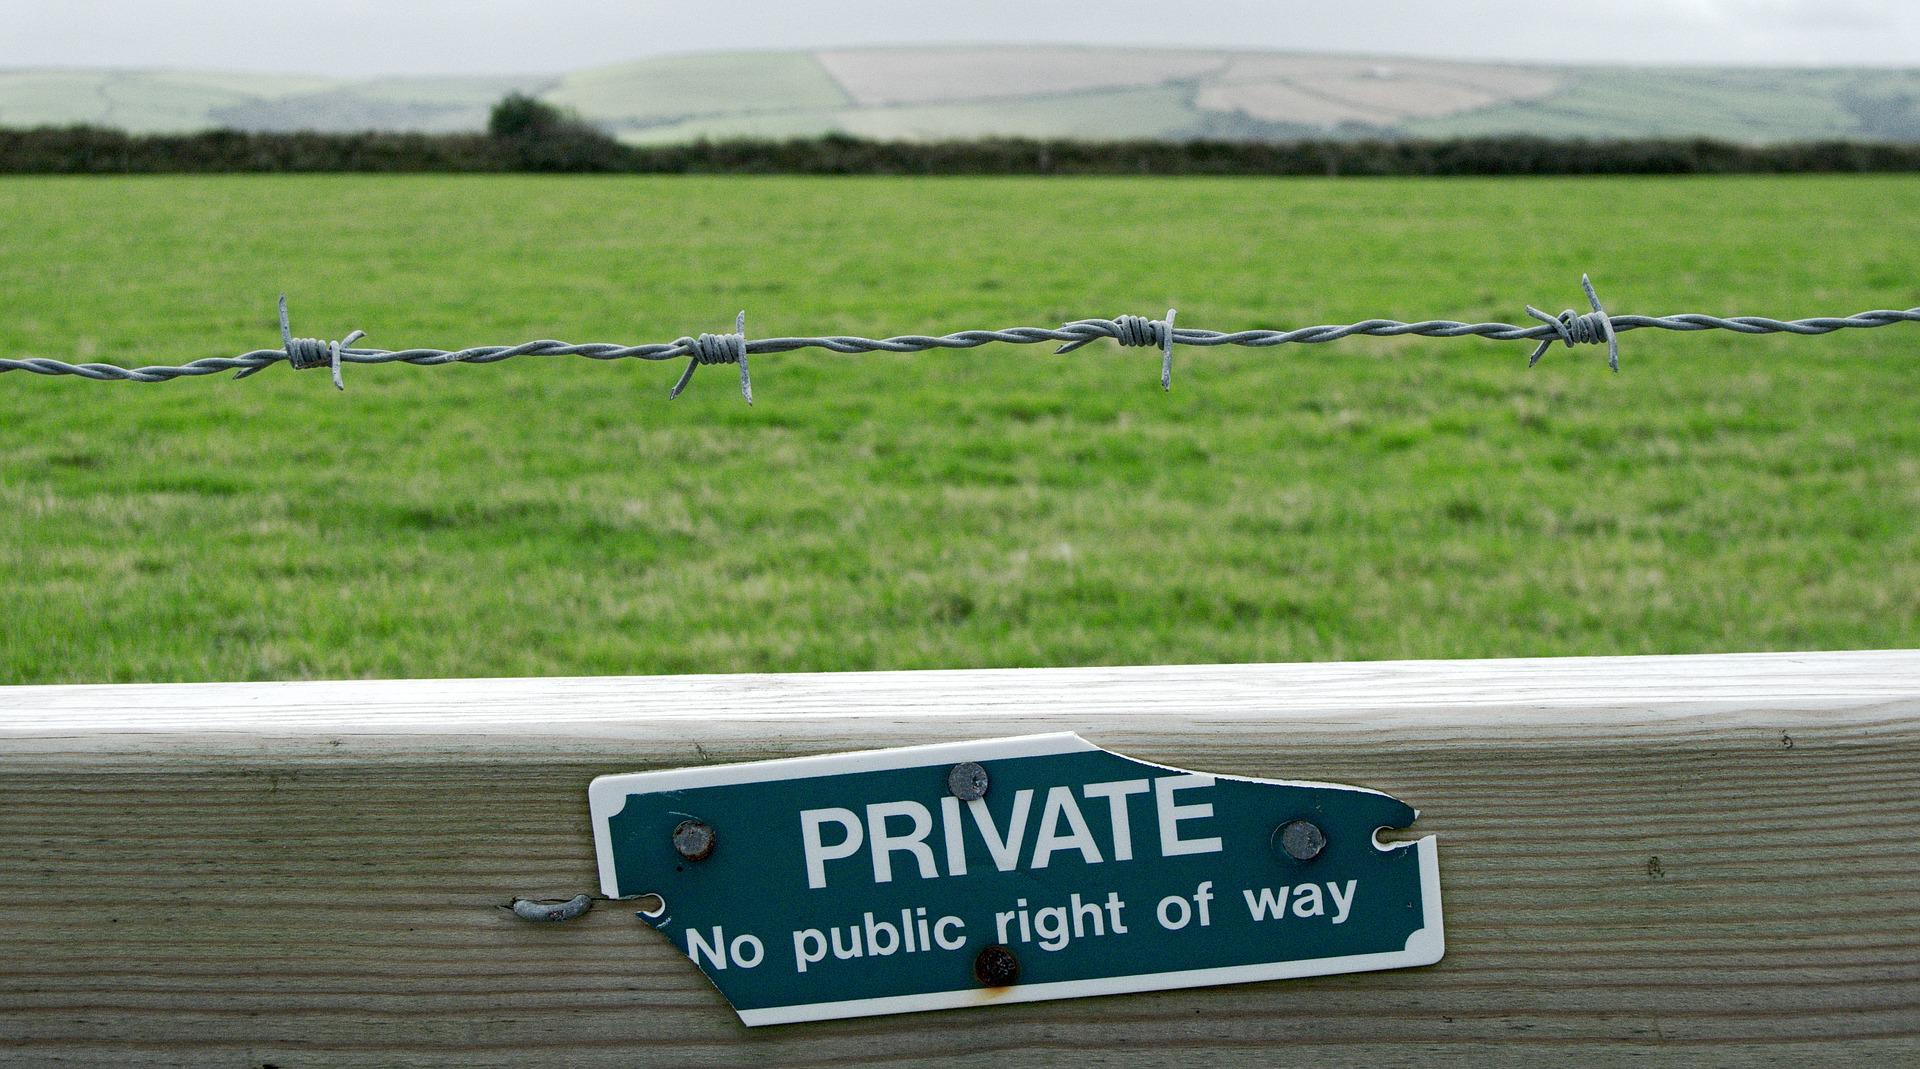 Private sign on a fence